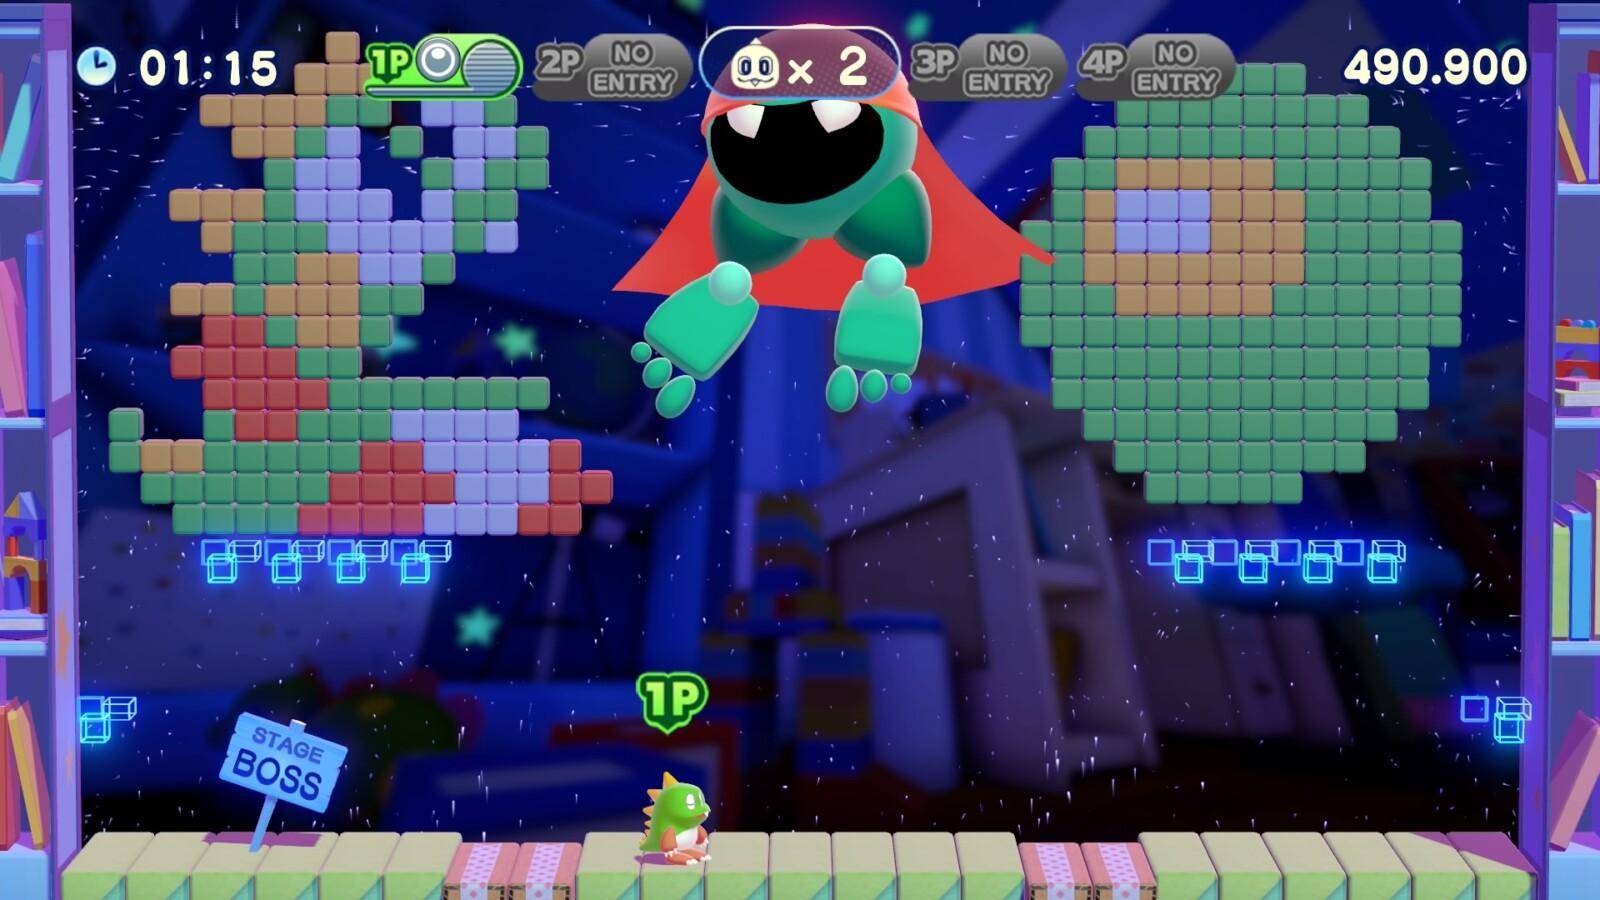 Reseña - Bubble Bobble 4 Friends: The Baron is Back! (PS4) 2